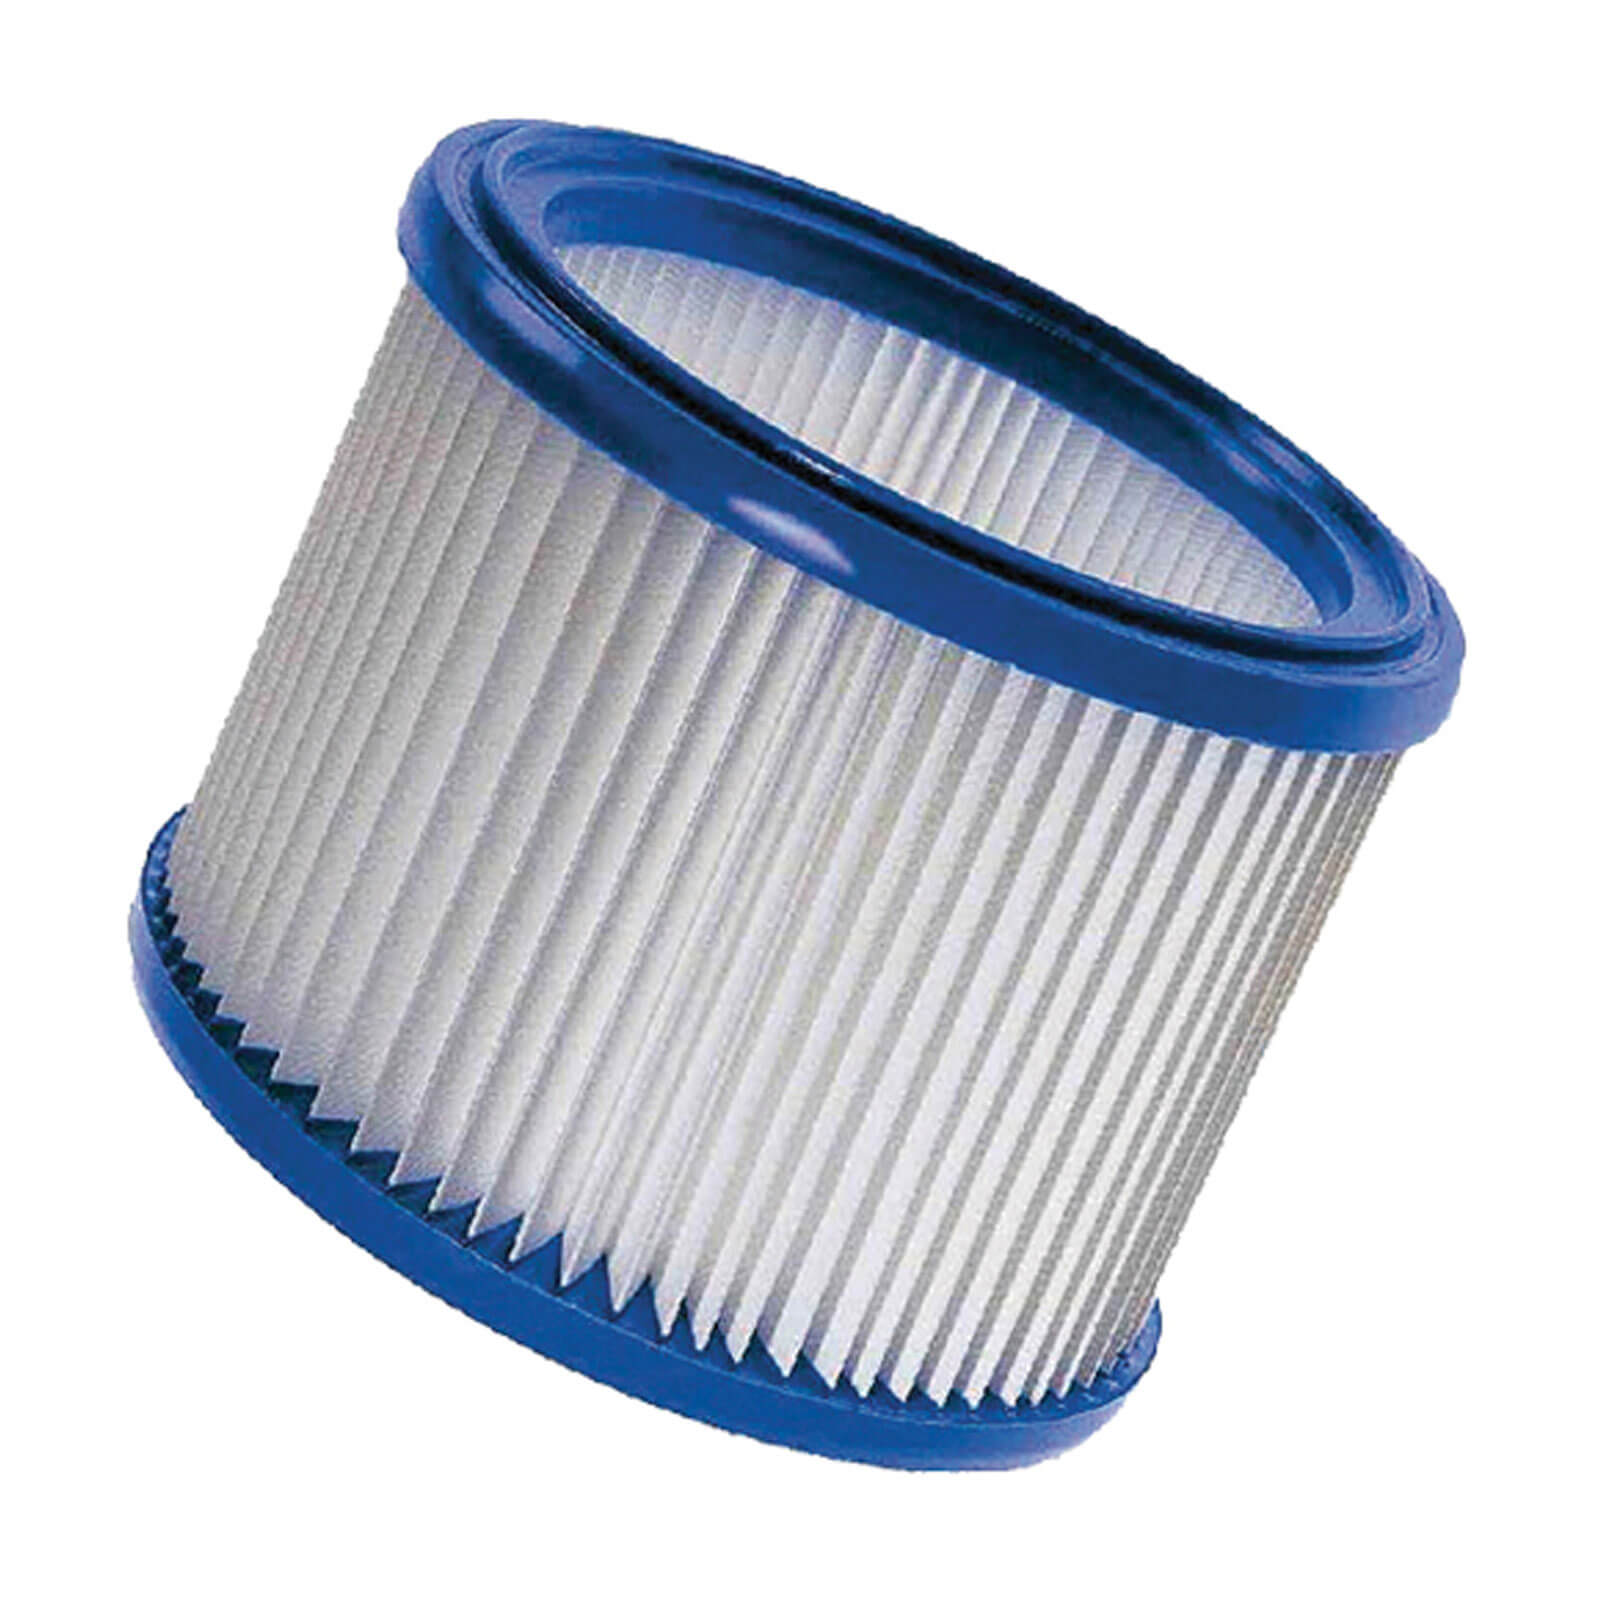 Image of Makita Filter Cartridge for 446L, VC2012L, VC2511, and VC3011L Vacuum Cleaners